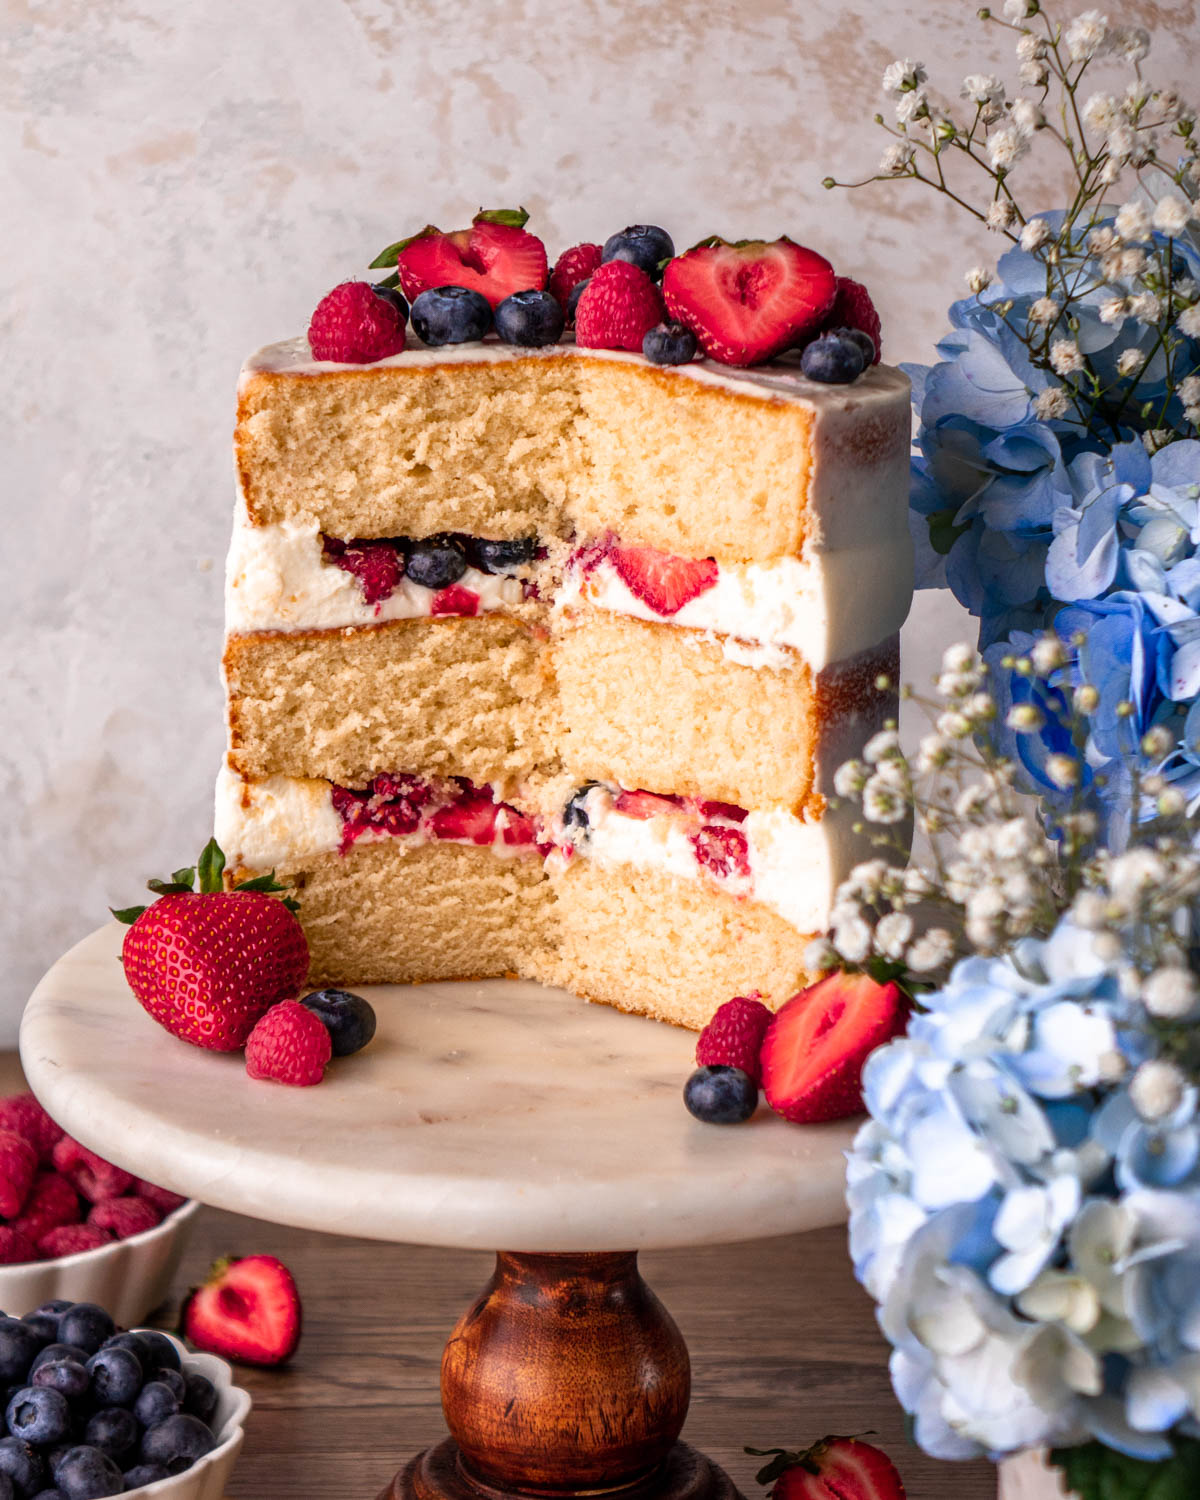 cut open Chantilly cake with blueberries, strawberries and raspberries on top, on a marble cake stand on a wood board with blue flowers around it